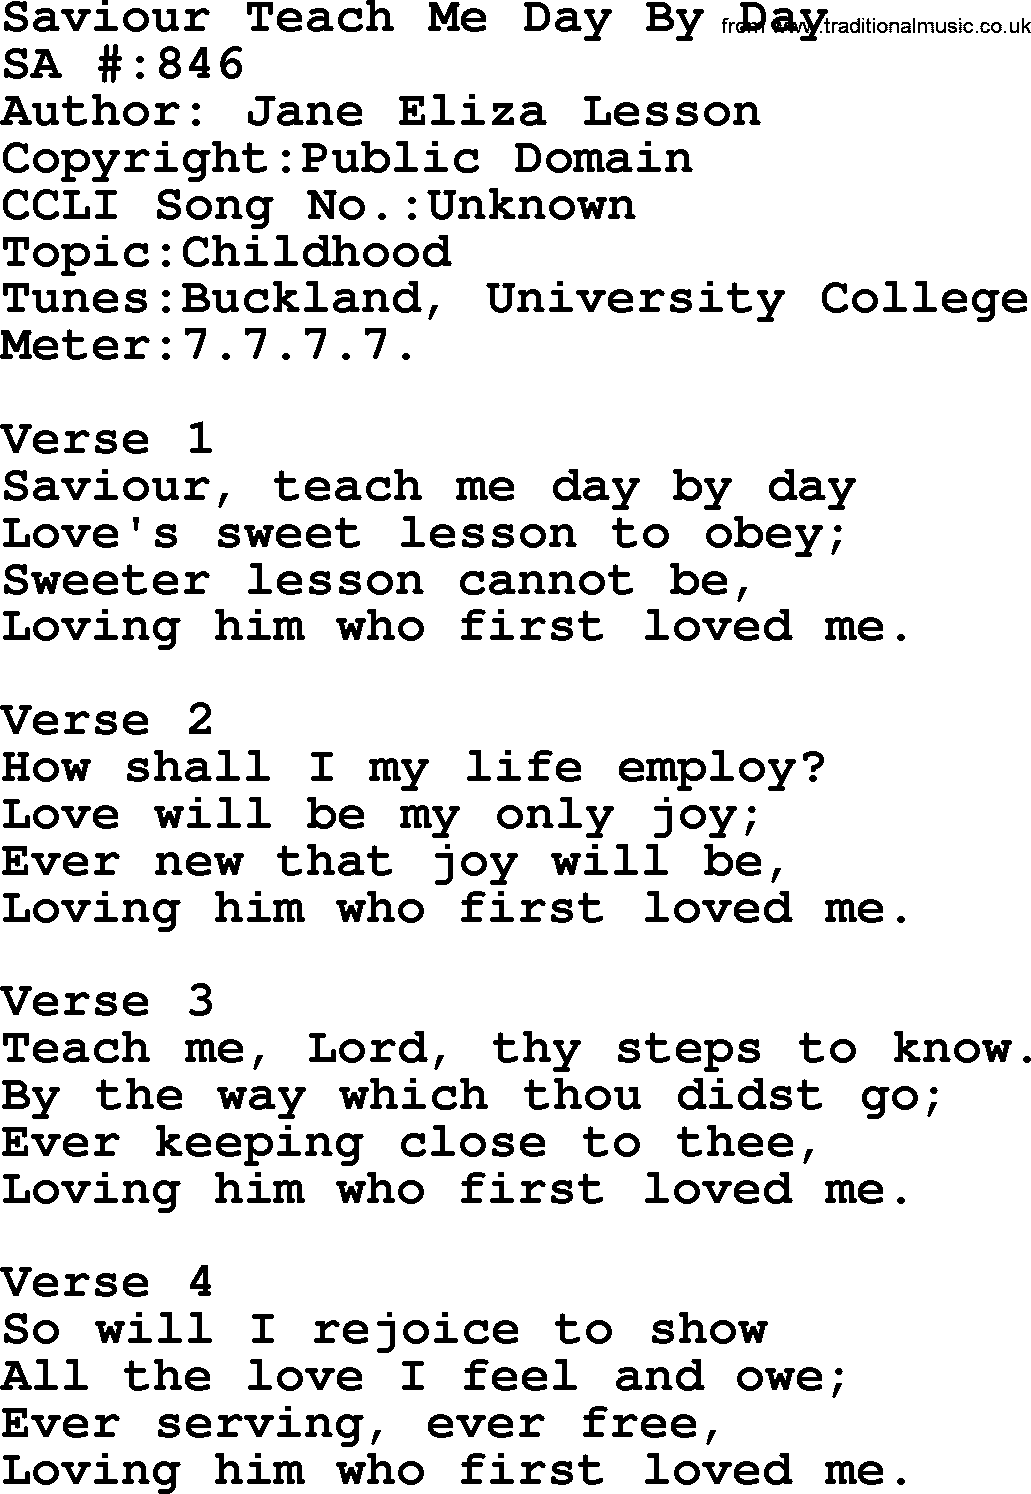 Salvation Army Hymnal, title: Saviour Teach Me Day By Day, with lyrics and PDF,